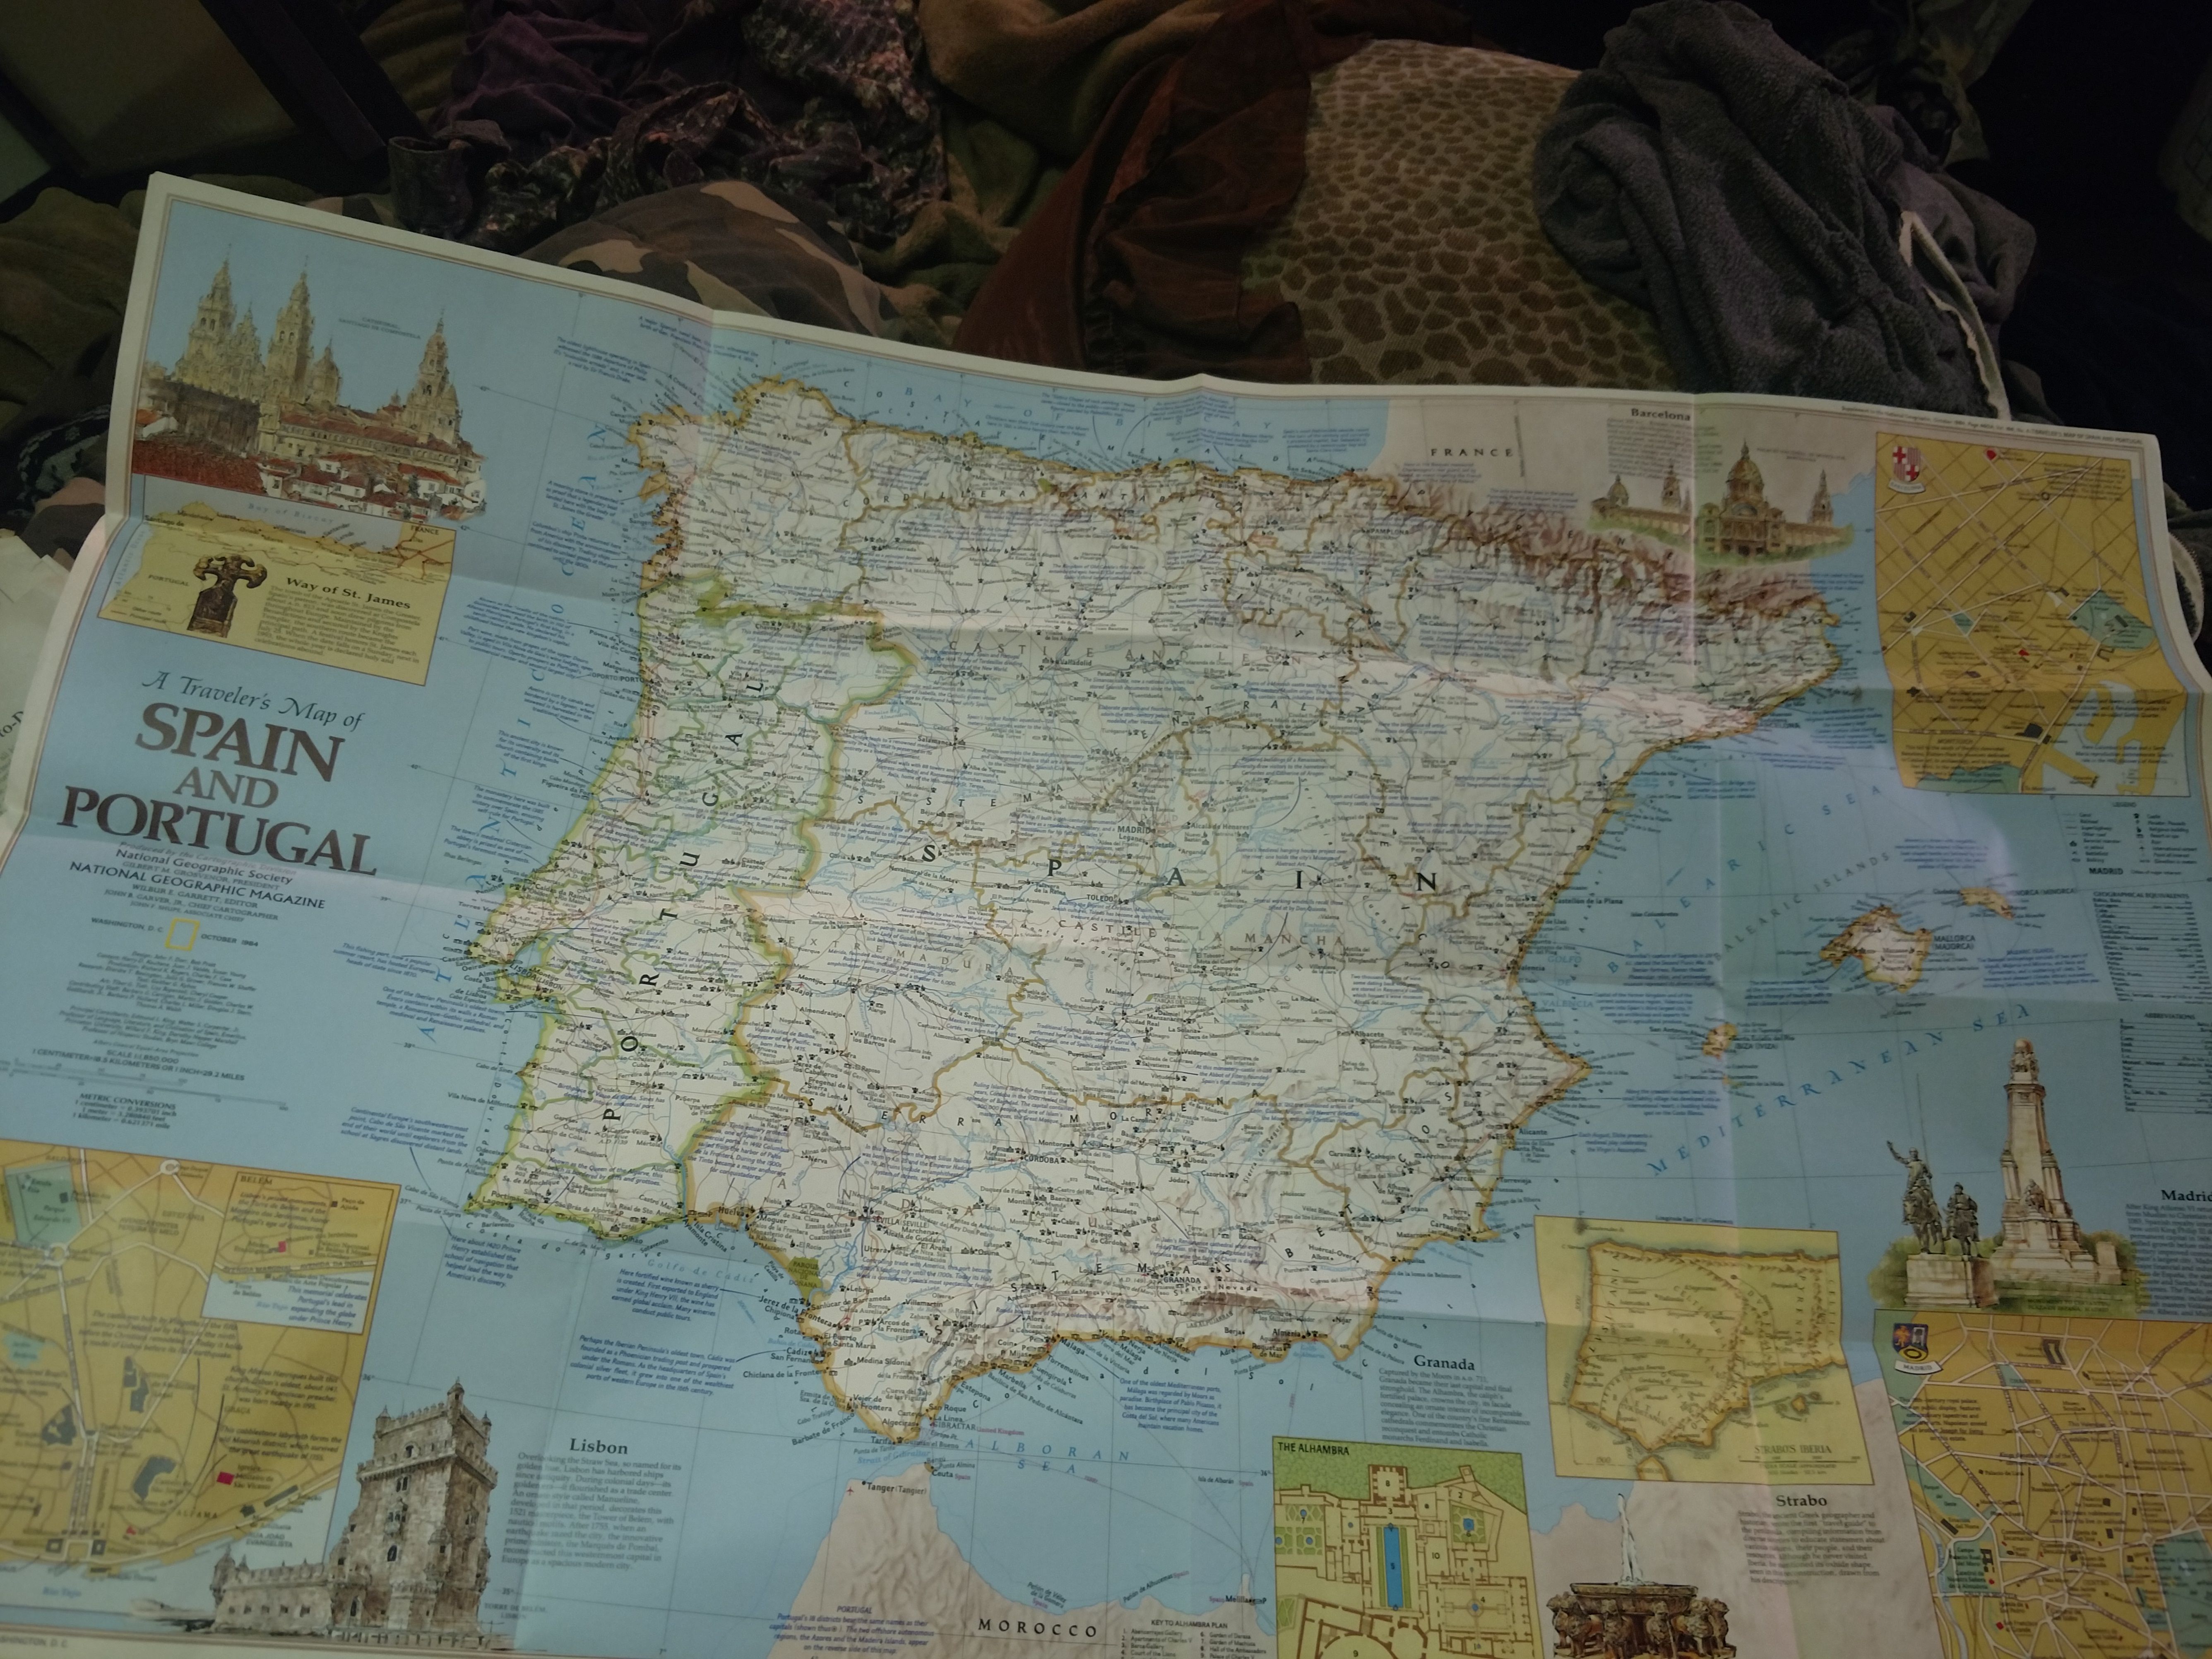 National Geographic vintage map "A Travelers Map of Spain and Portugal"